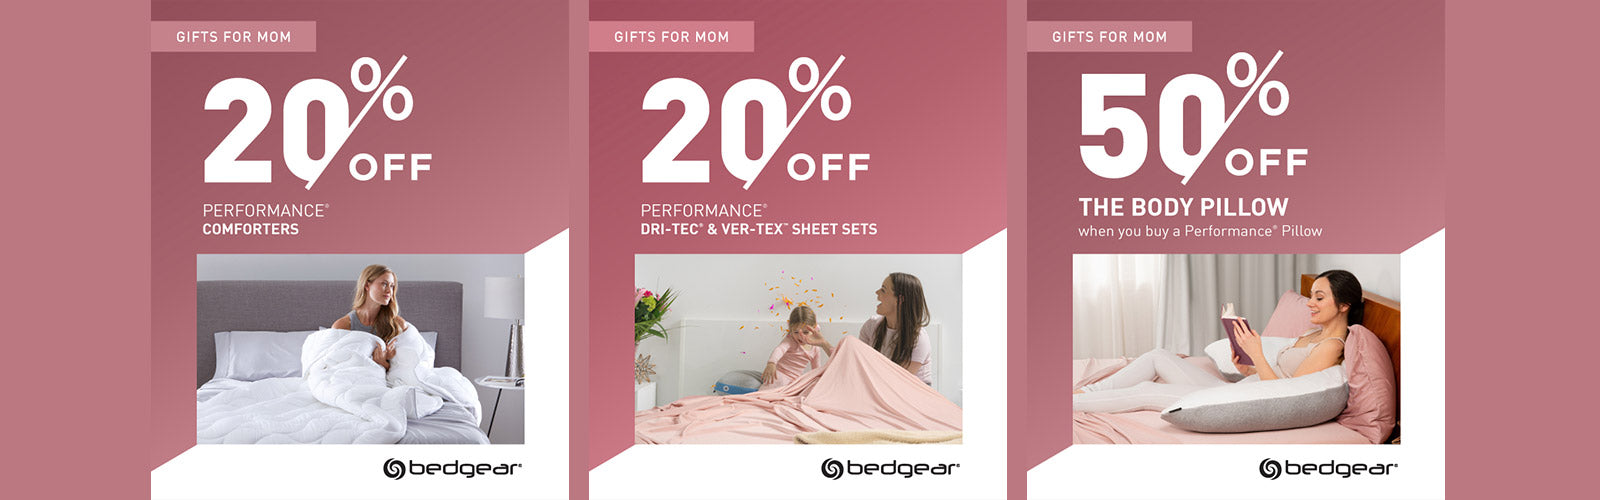 Bedgear Gifts for Mom